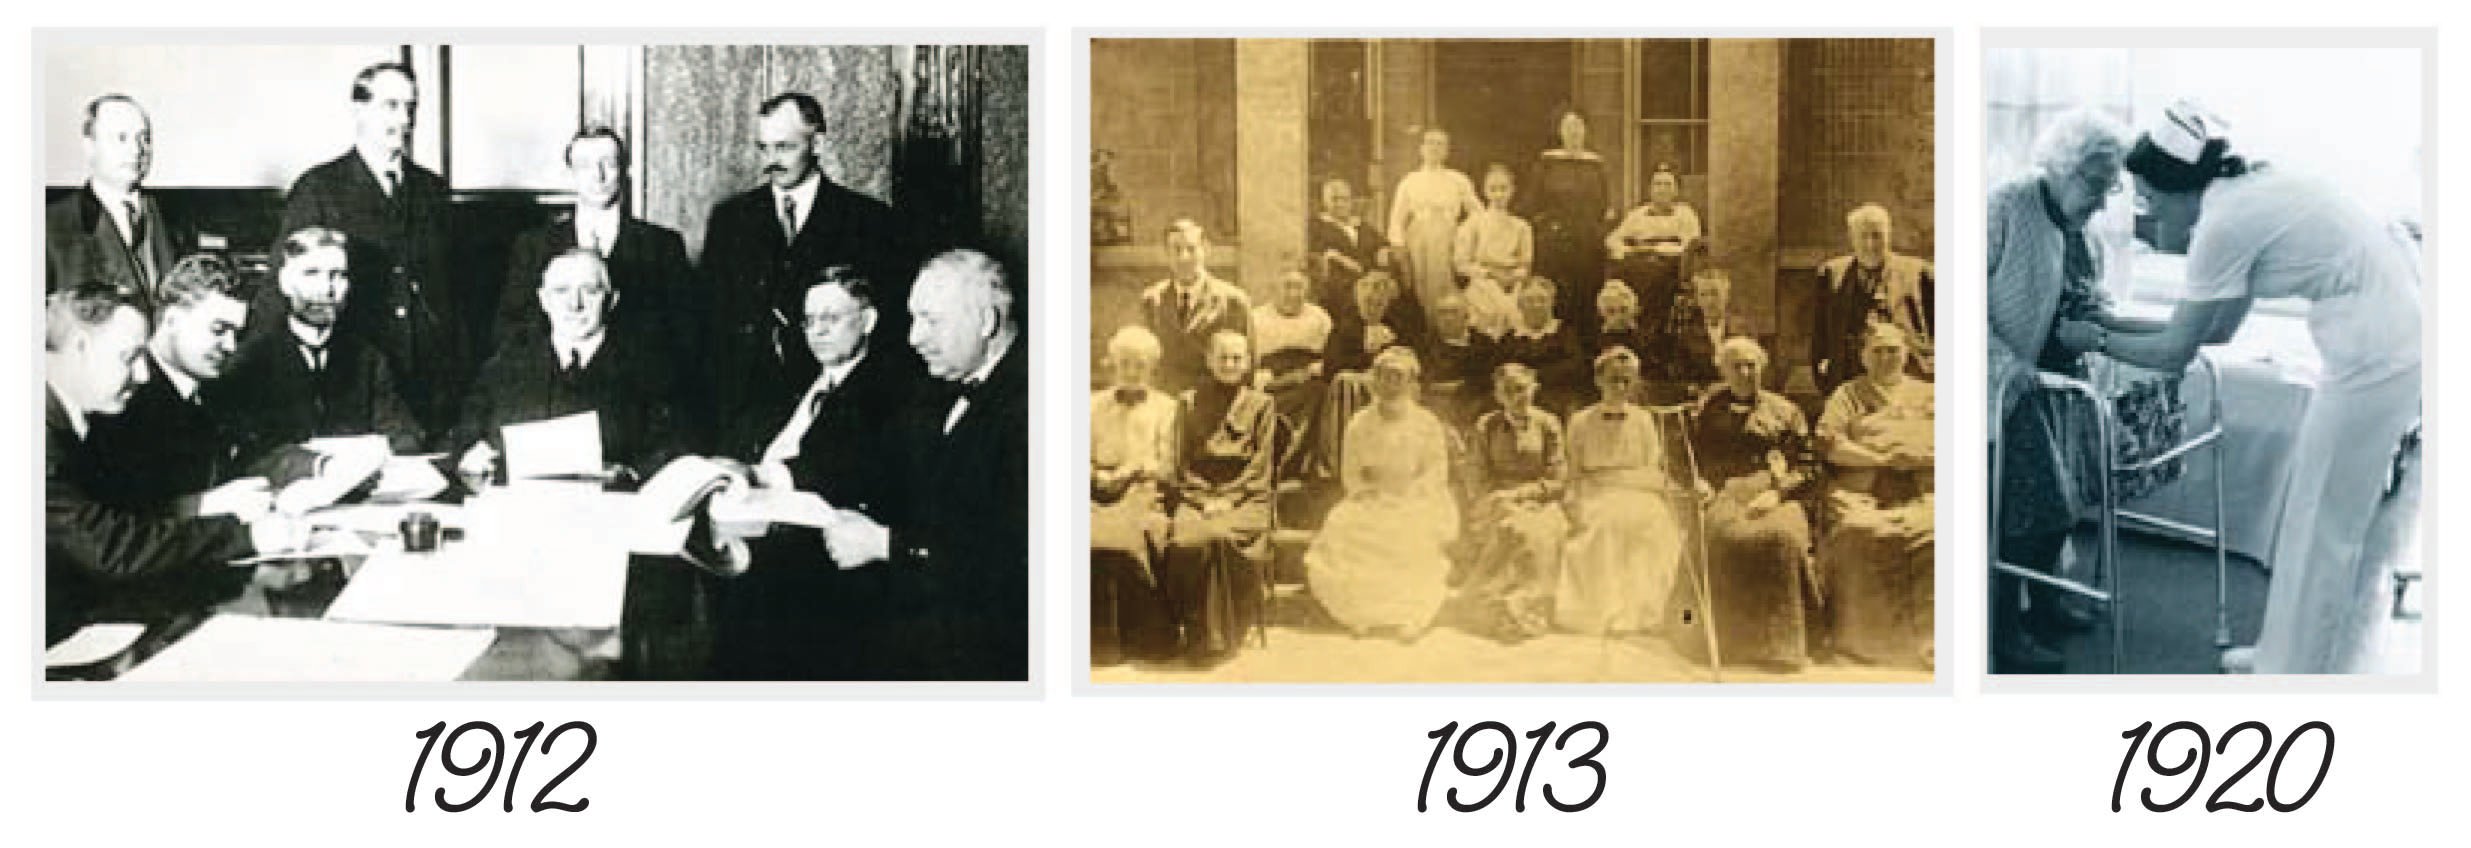 Otterbein Seniorlife photos from 1912, 1913, and 1920.